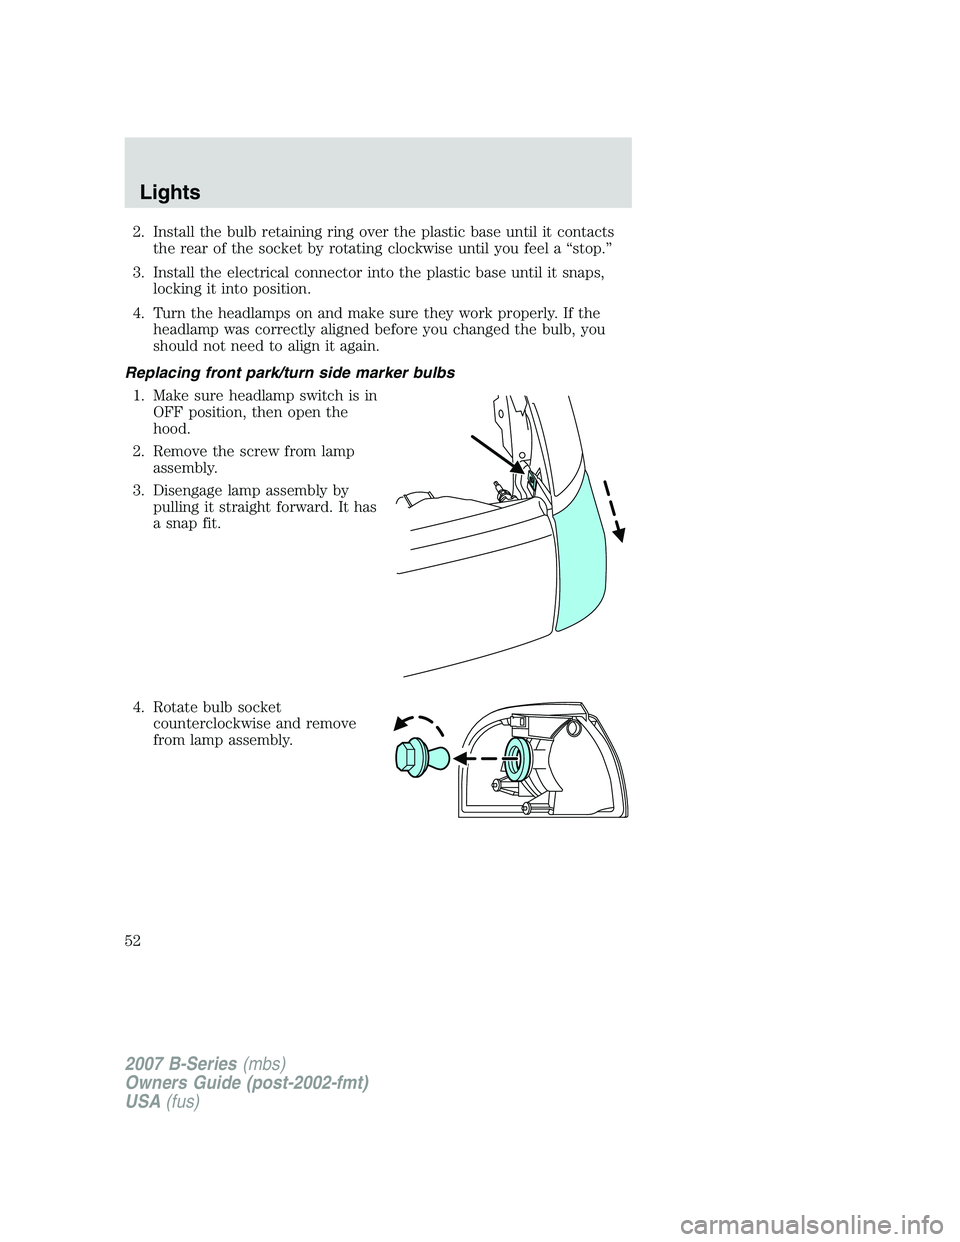 MAZDA MODEL B3000 TRUCK 2007  Owners Manual 2. Install the bulb retaining ring over the plastic base until it contactsthe rear of the socket by rotating clockwise until you feel a “stop.”
3. Install the electrical connector into the plastic